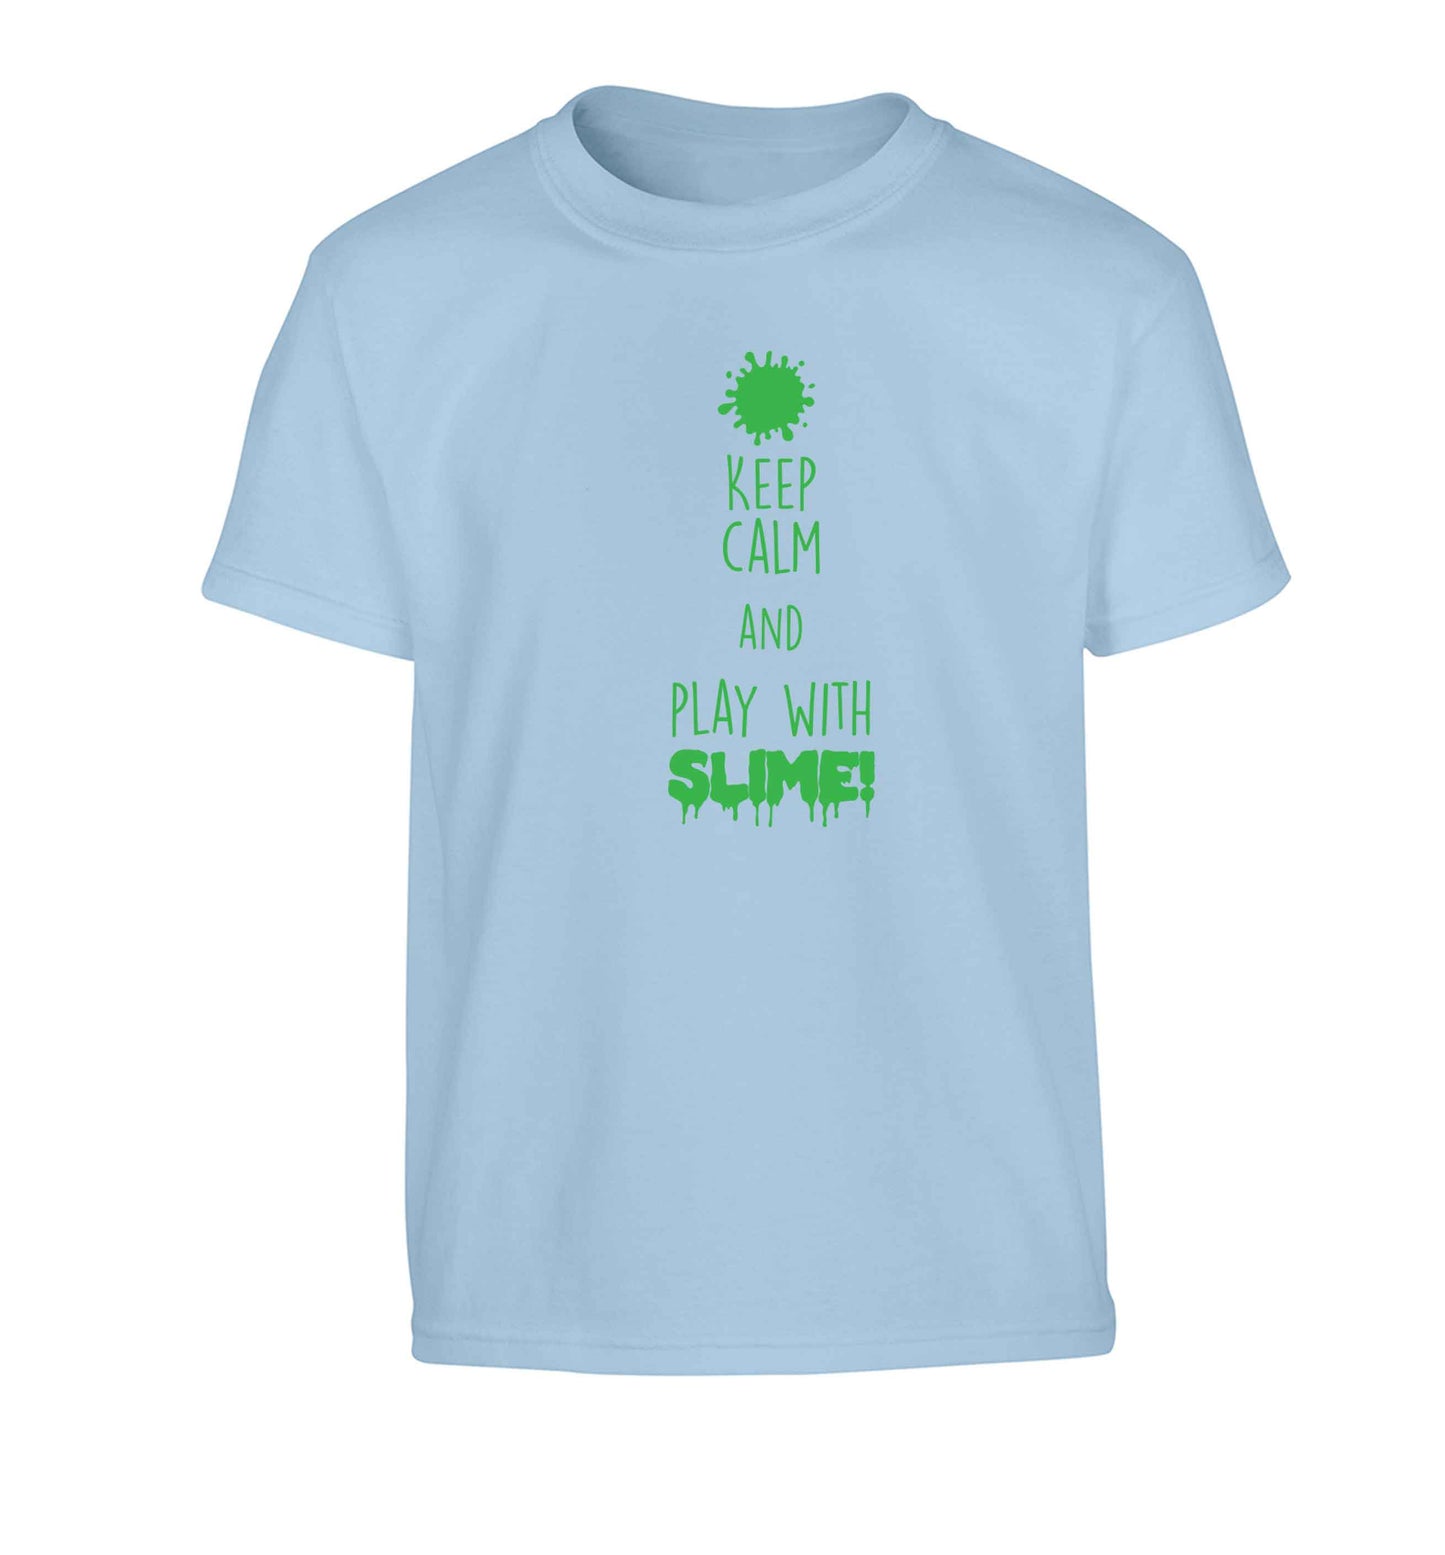 Neon green keep calm and play with slime!Children's light blue Tshirt 12-13 Years